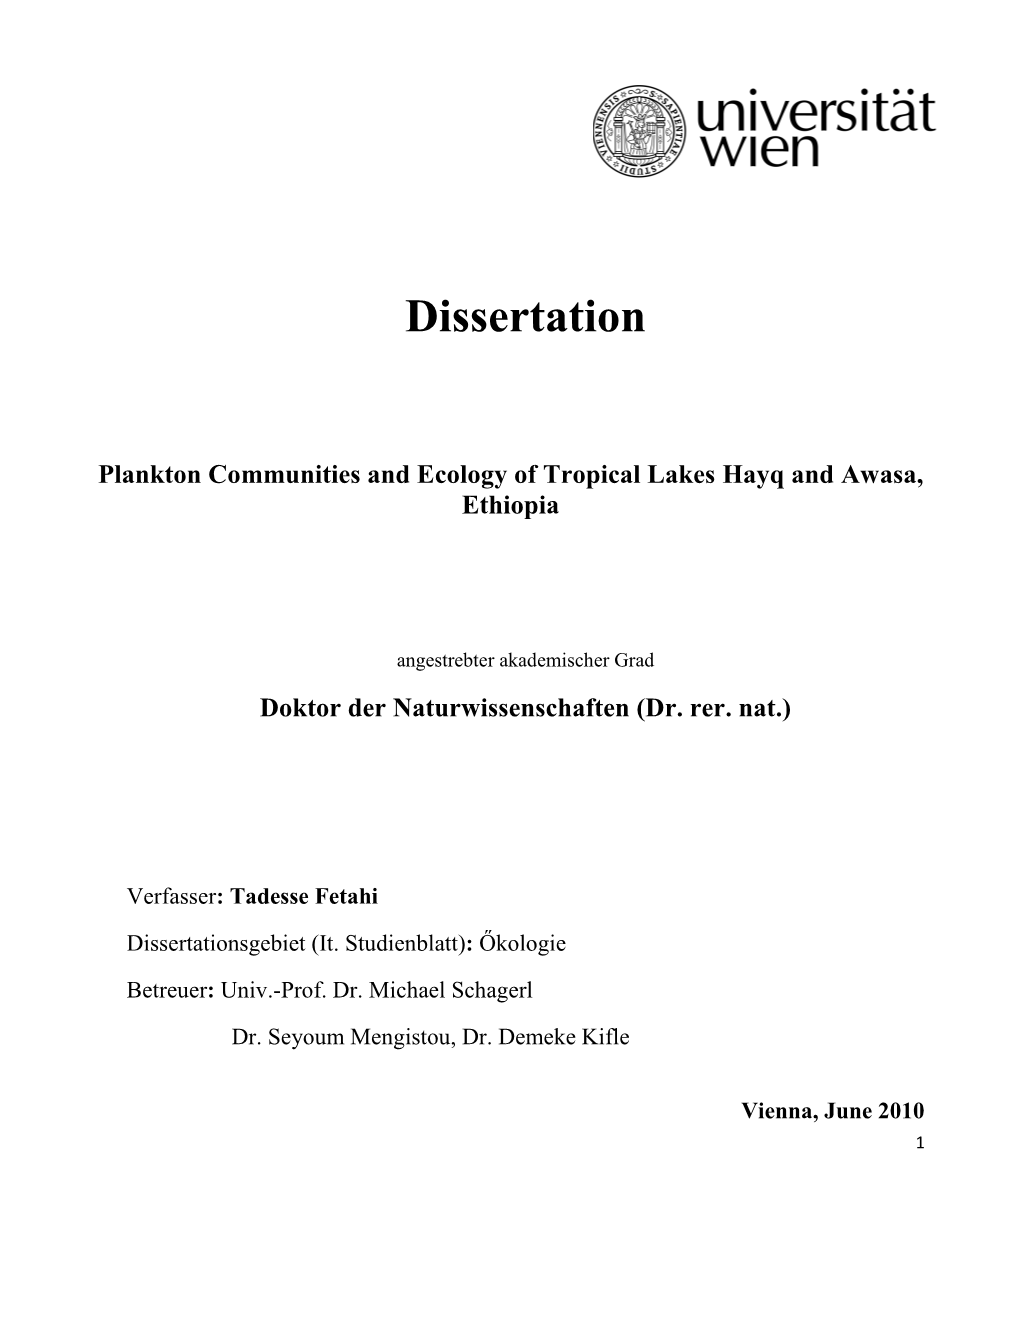 Dissertation Plankton Communities and Ecology of Tropical Lakes